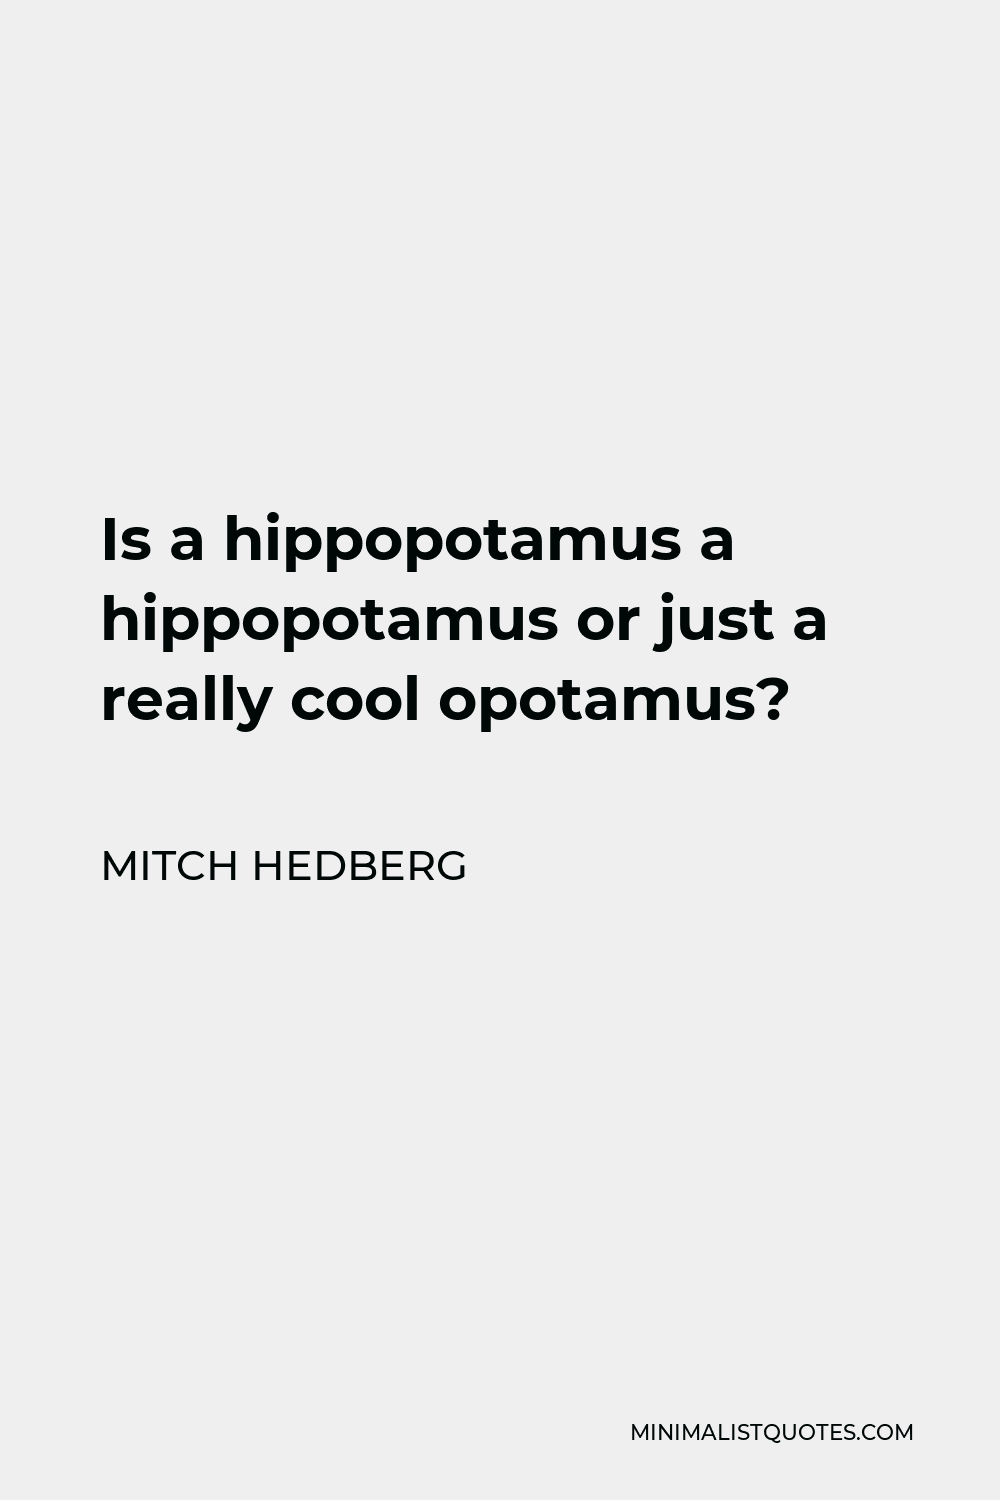 Mitch Hedberg Quote - Is a hippopotamus a hippopotamus or just a really cool opotamus?